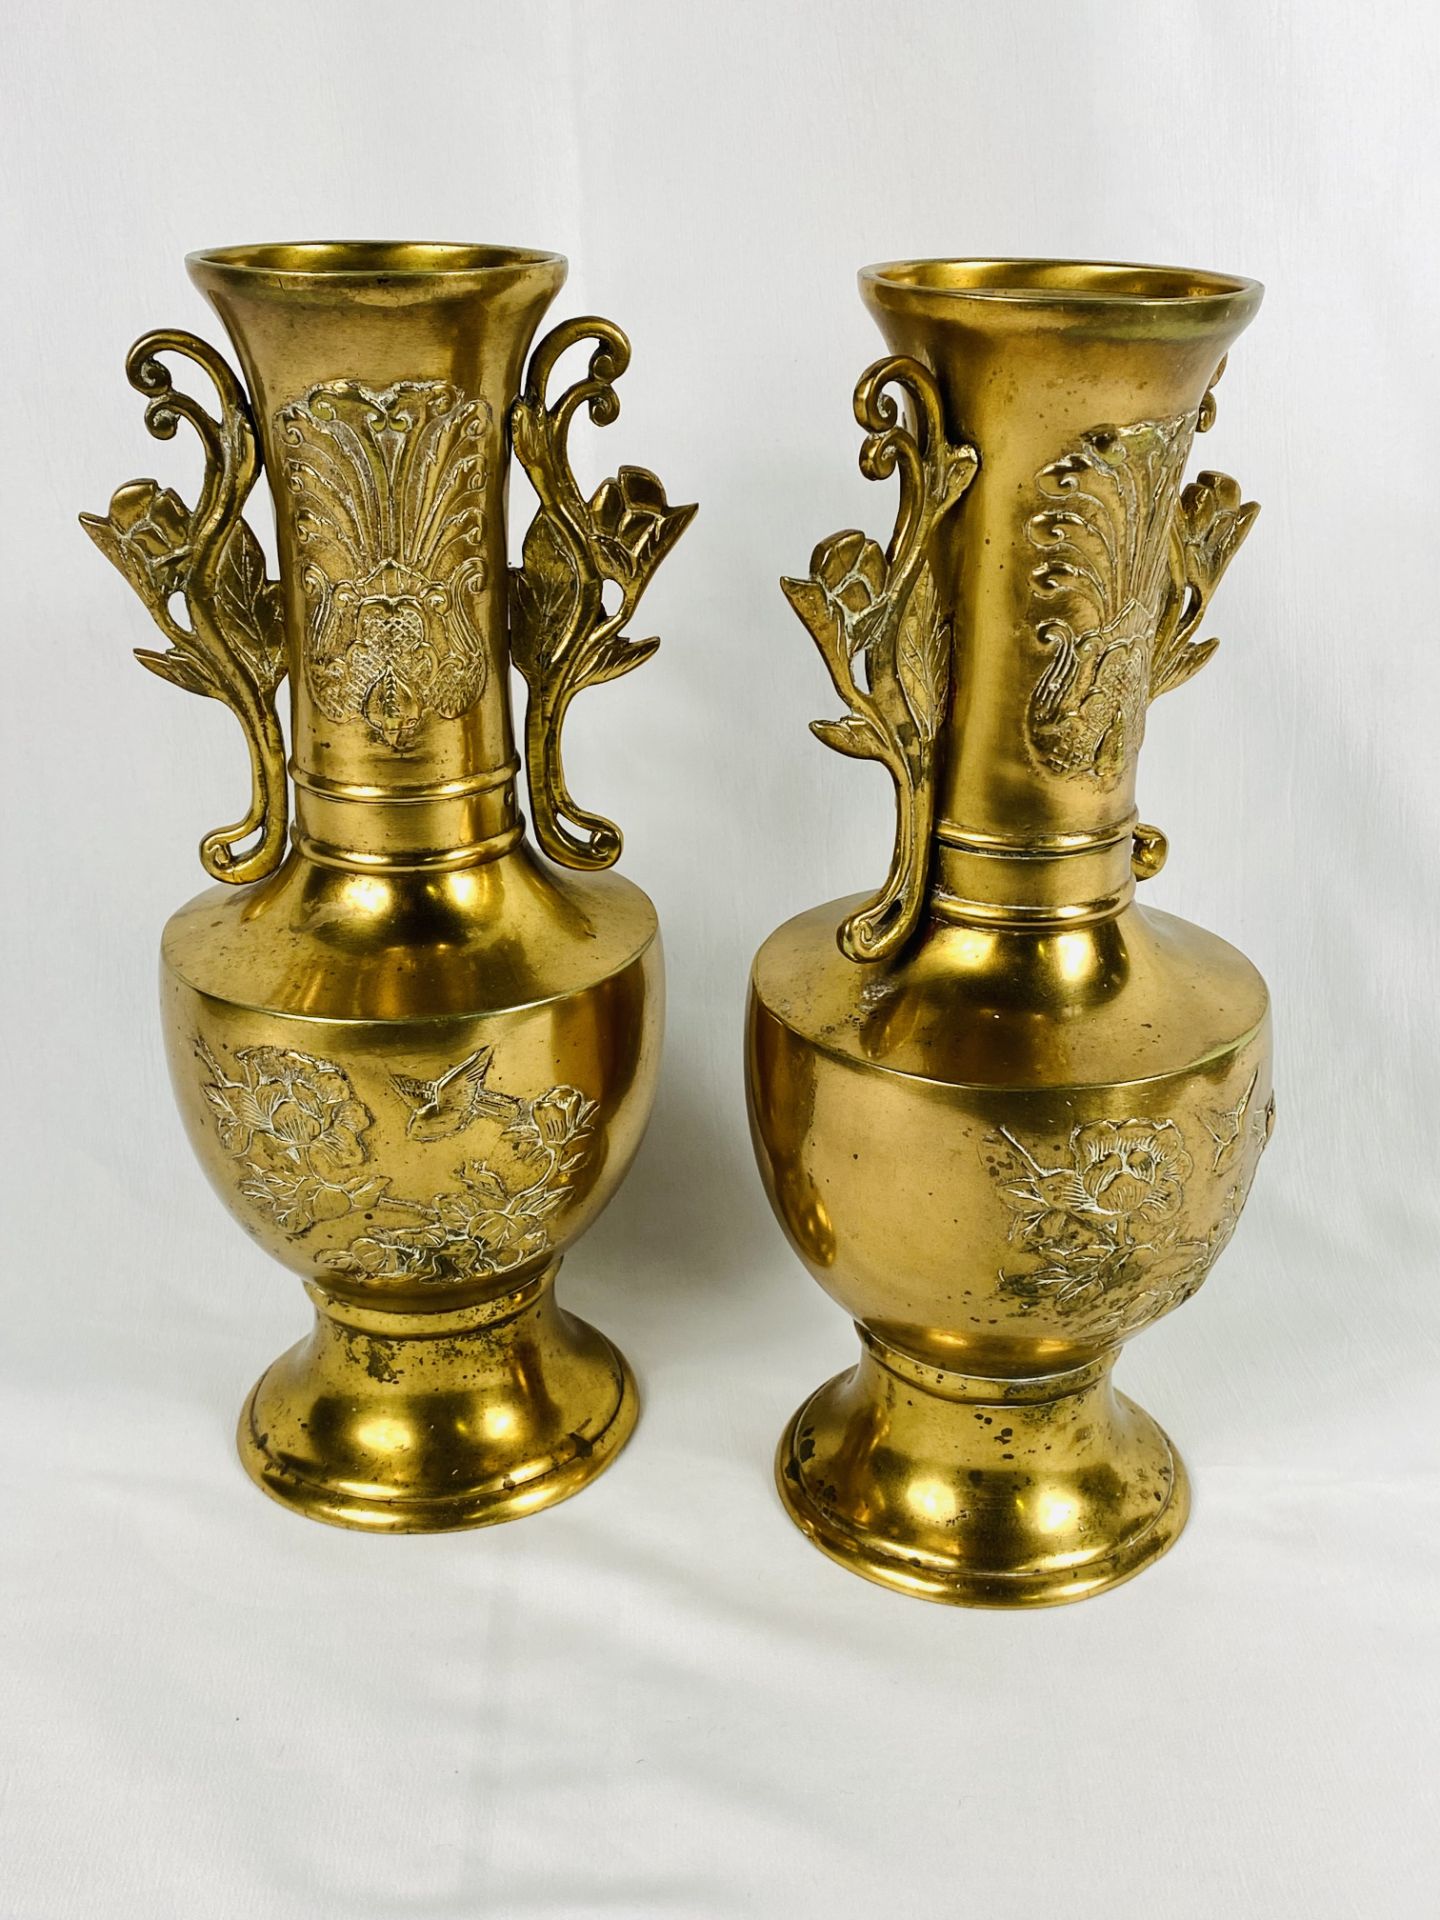 Pair of Meiji style brass vases - Image 3 of 3